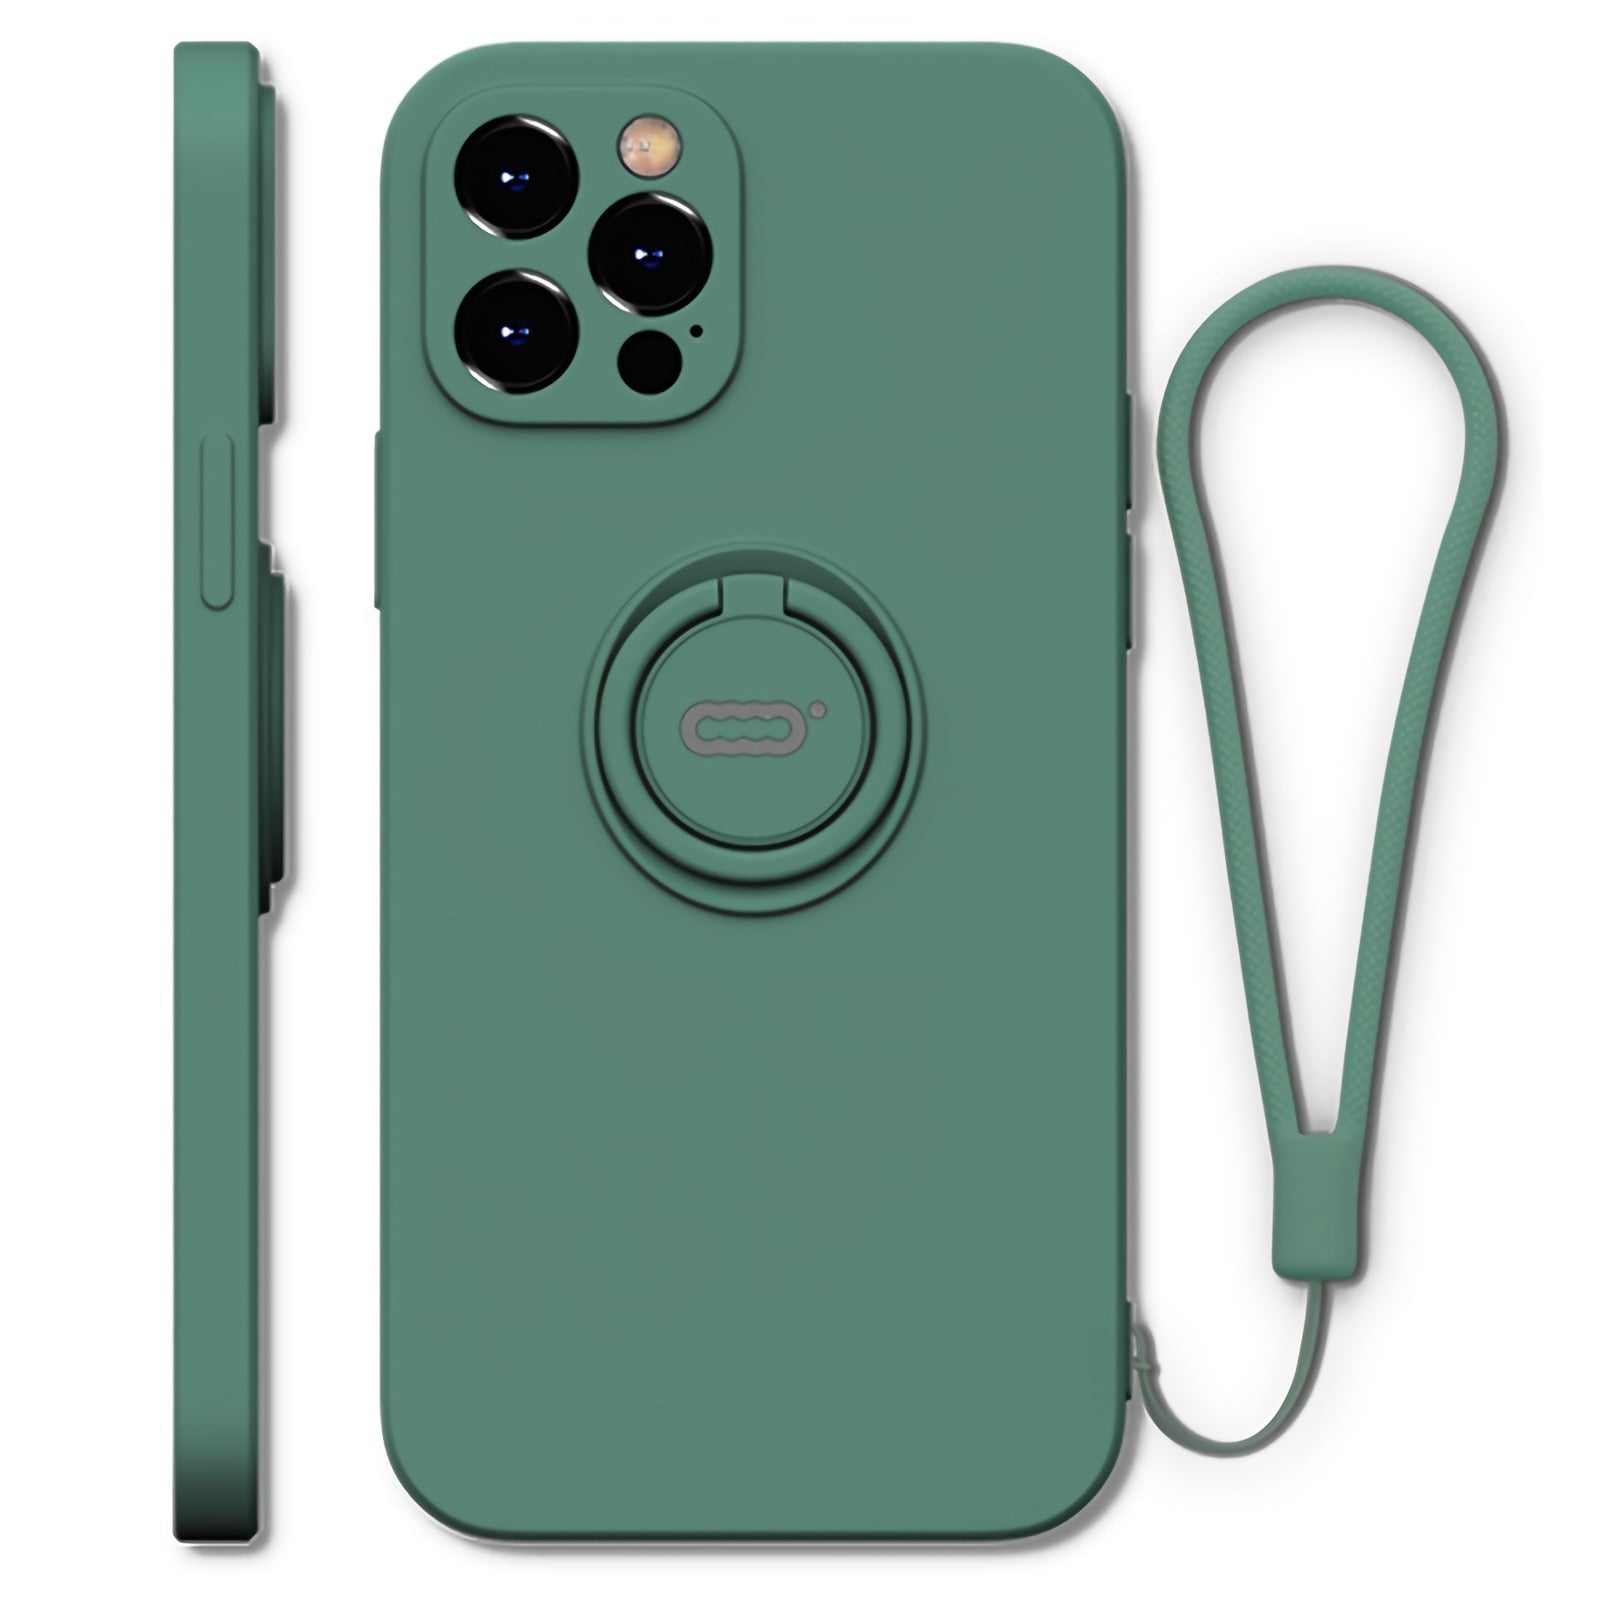 Army Green Color Case - iPhone 7/8/X/XR/XS/XS Max/SE(2020)/11/11 Pro/11 Pro Max/12/12 Pro/12 Mini/12 Pro Max, 360 Ring Holder Kickstand - Anti-Scratch Protective Case - 380230 for iPhone 7 8 / Army Green / United States Find Epic Store